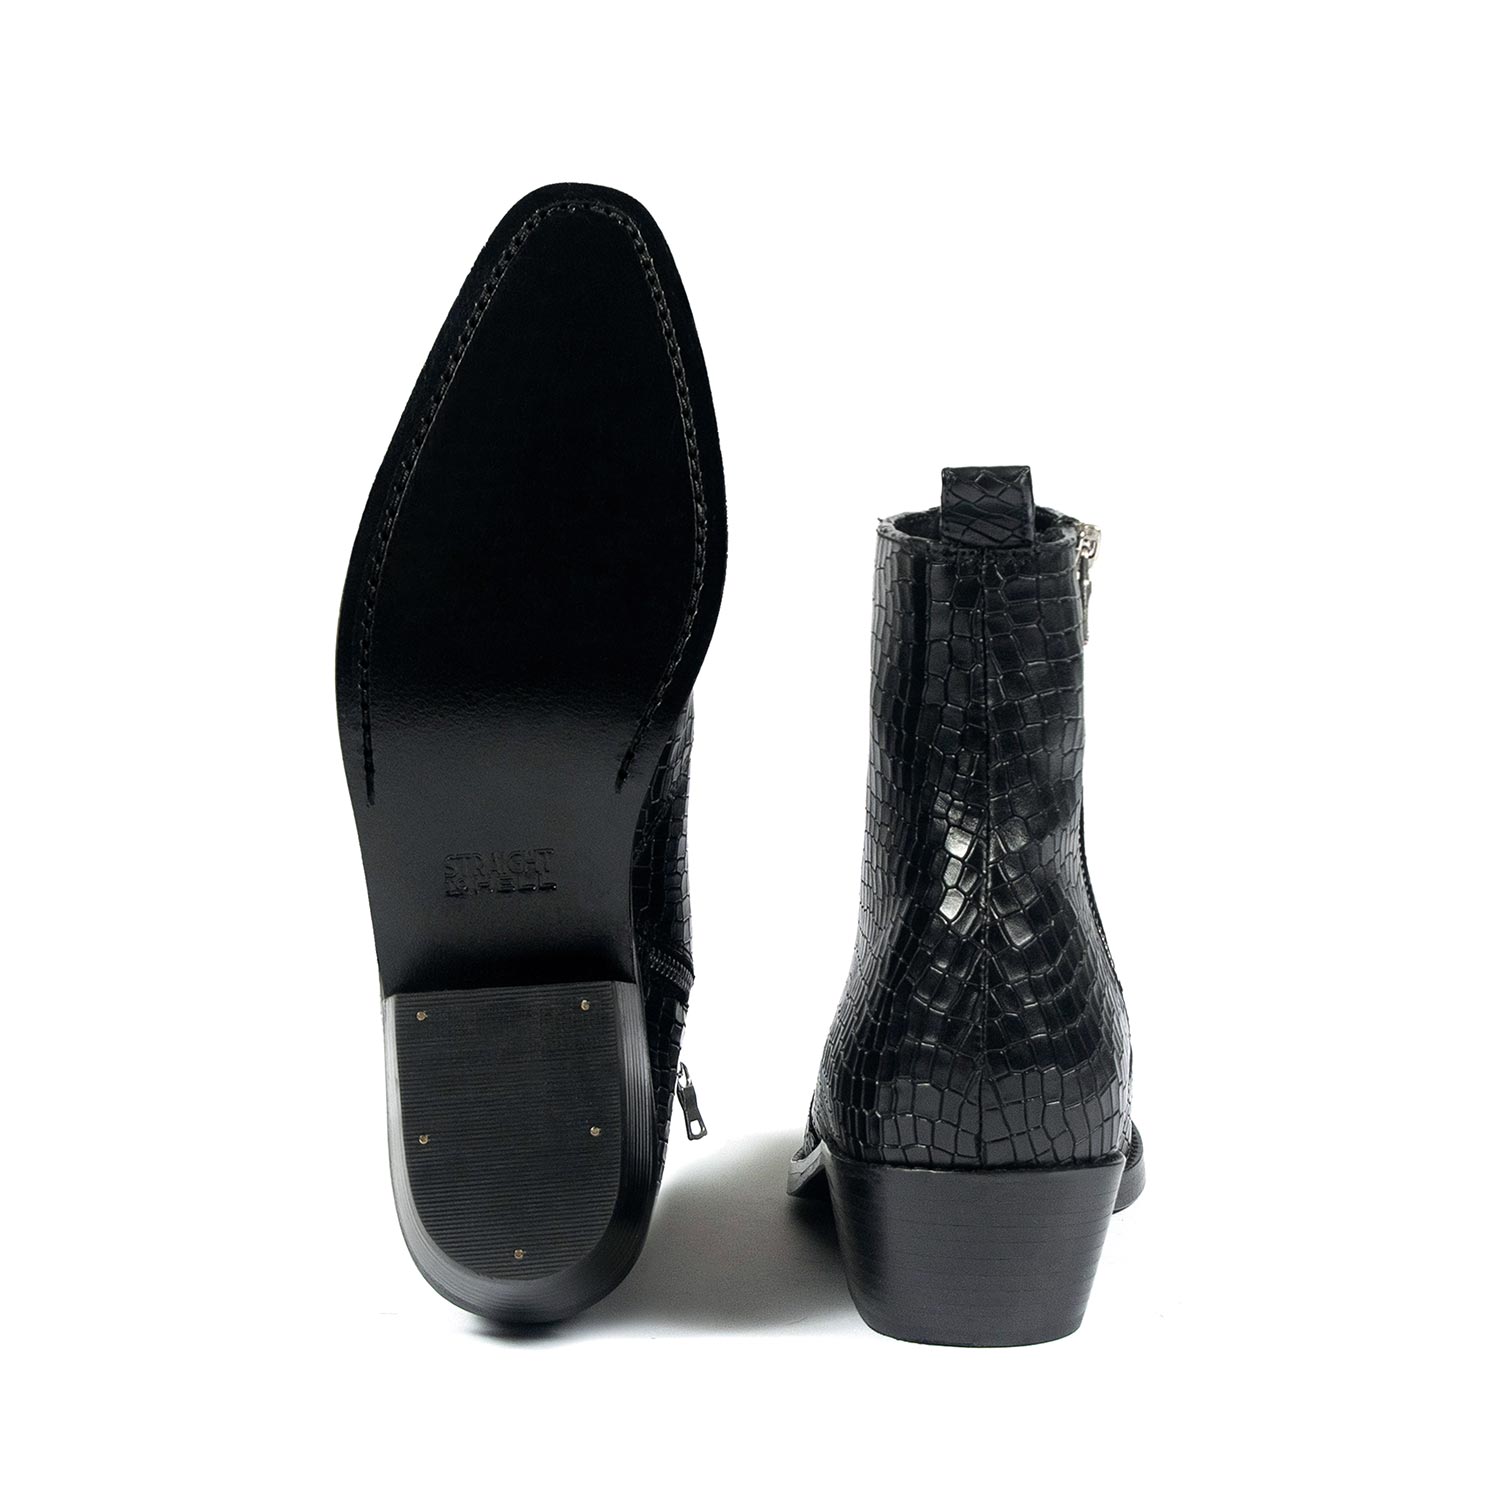 Richards - Black Snakeskin Leather Zip Boot | Straight To Hell Apparel